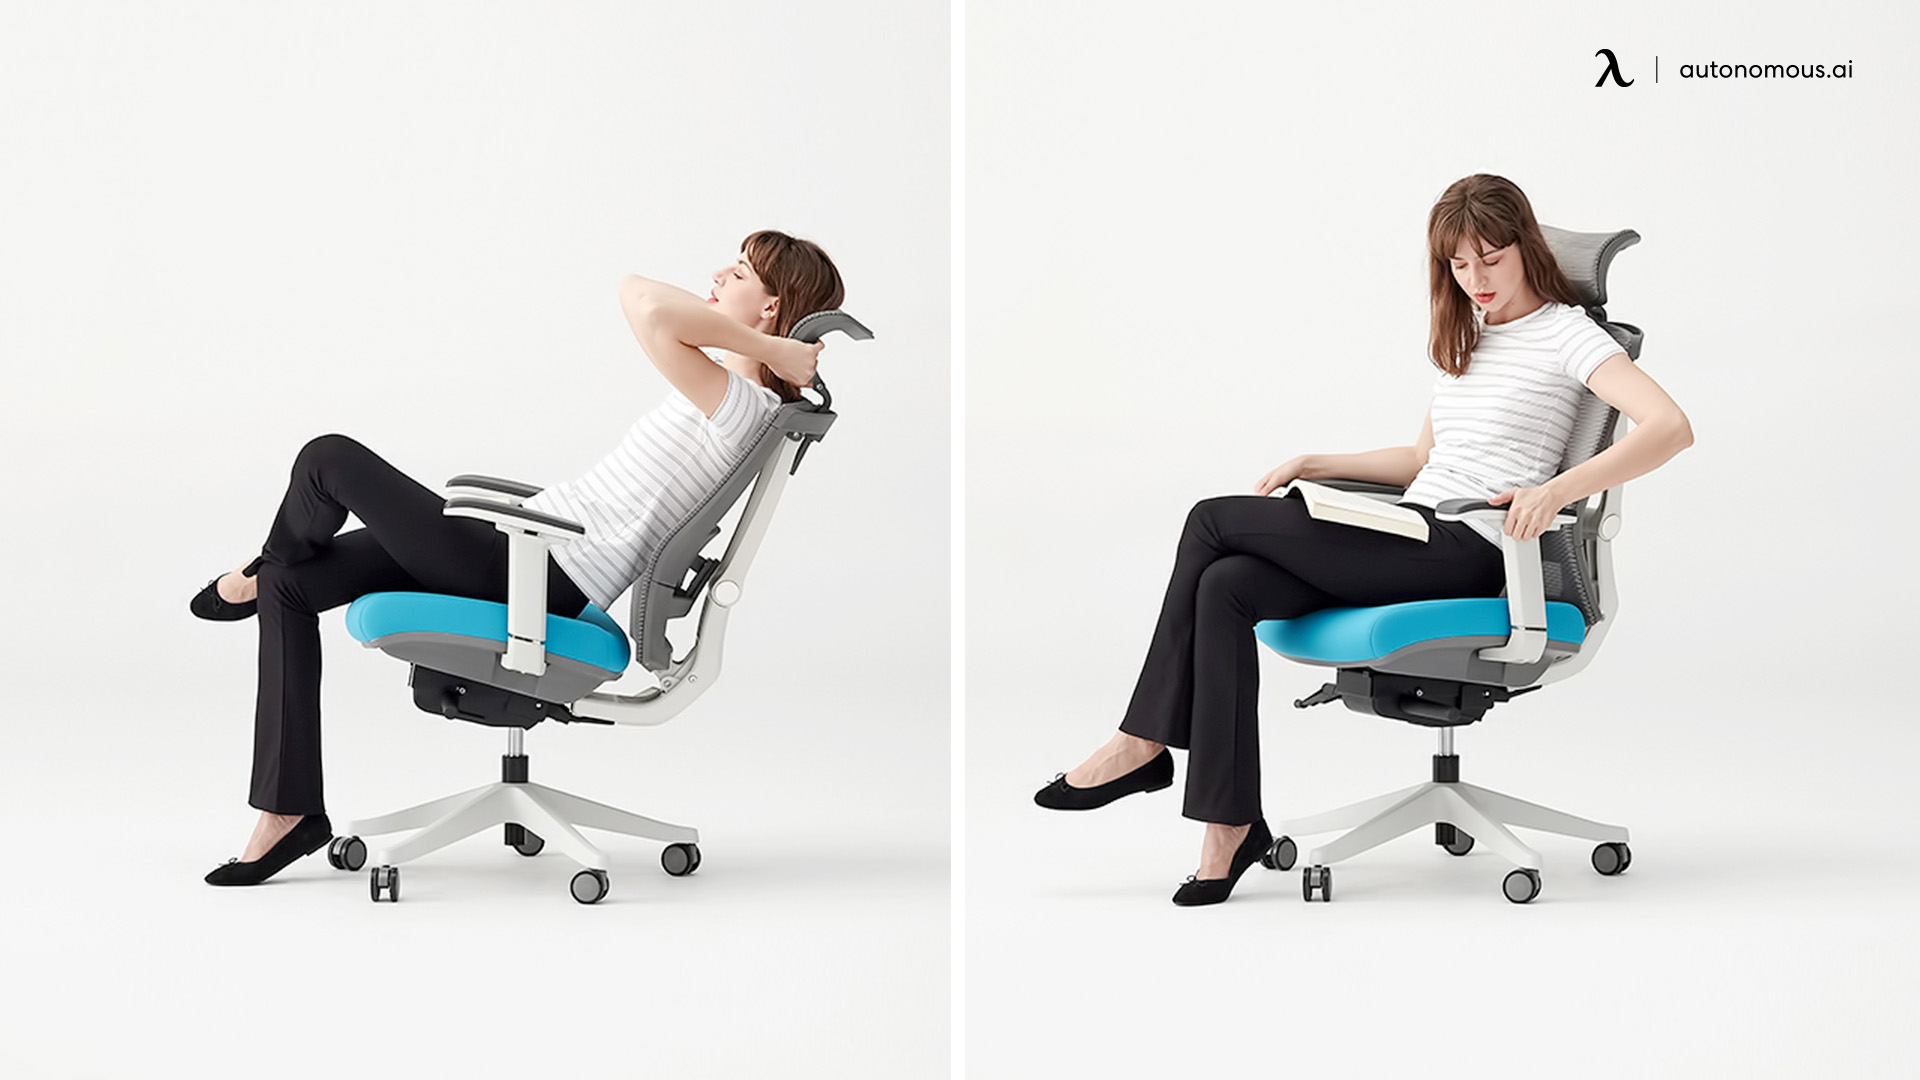 Make A Diy Ergonomic Chair From Z Step By Guide